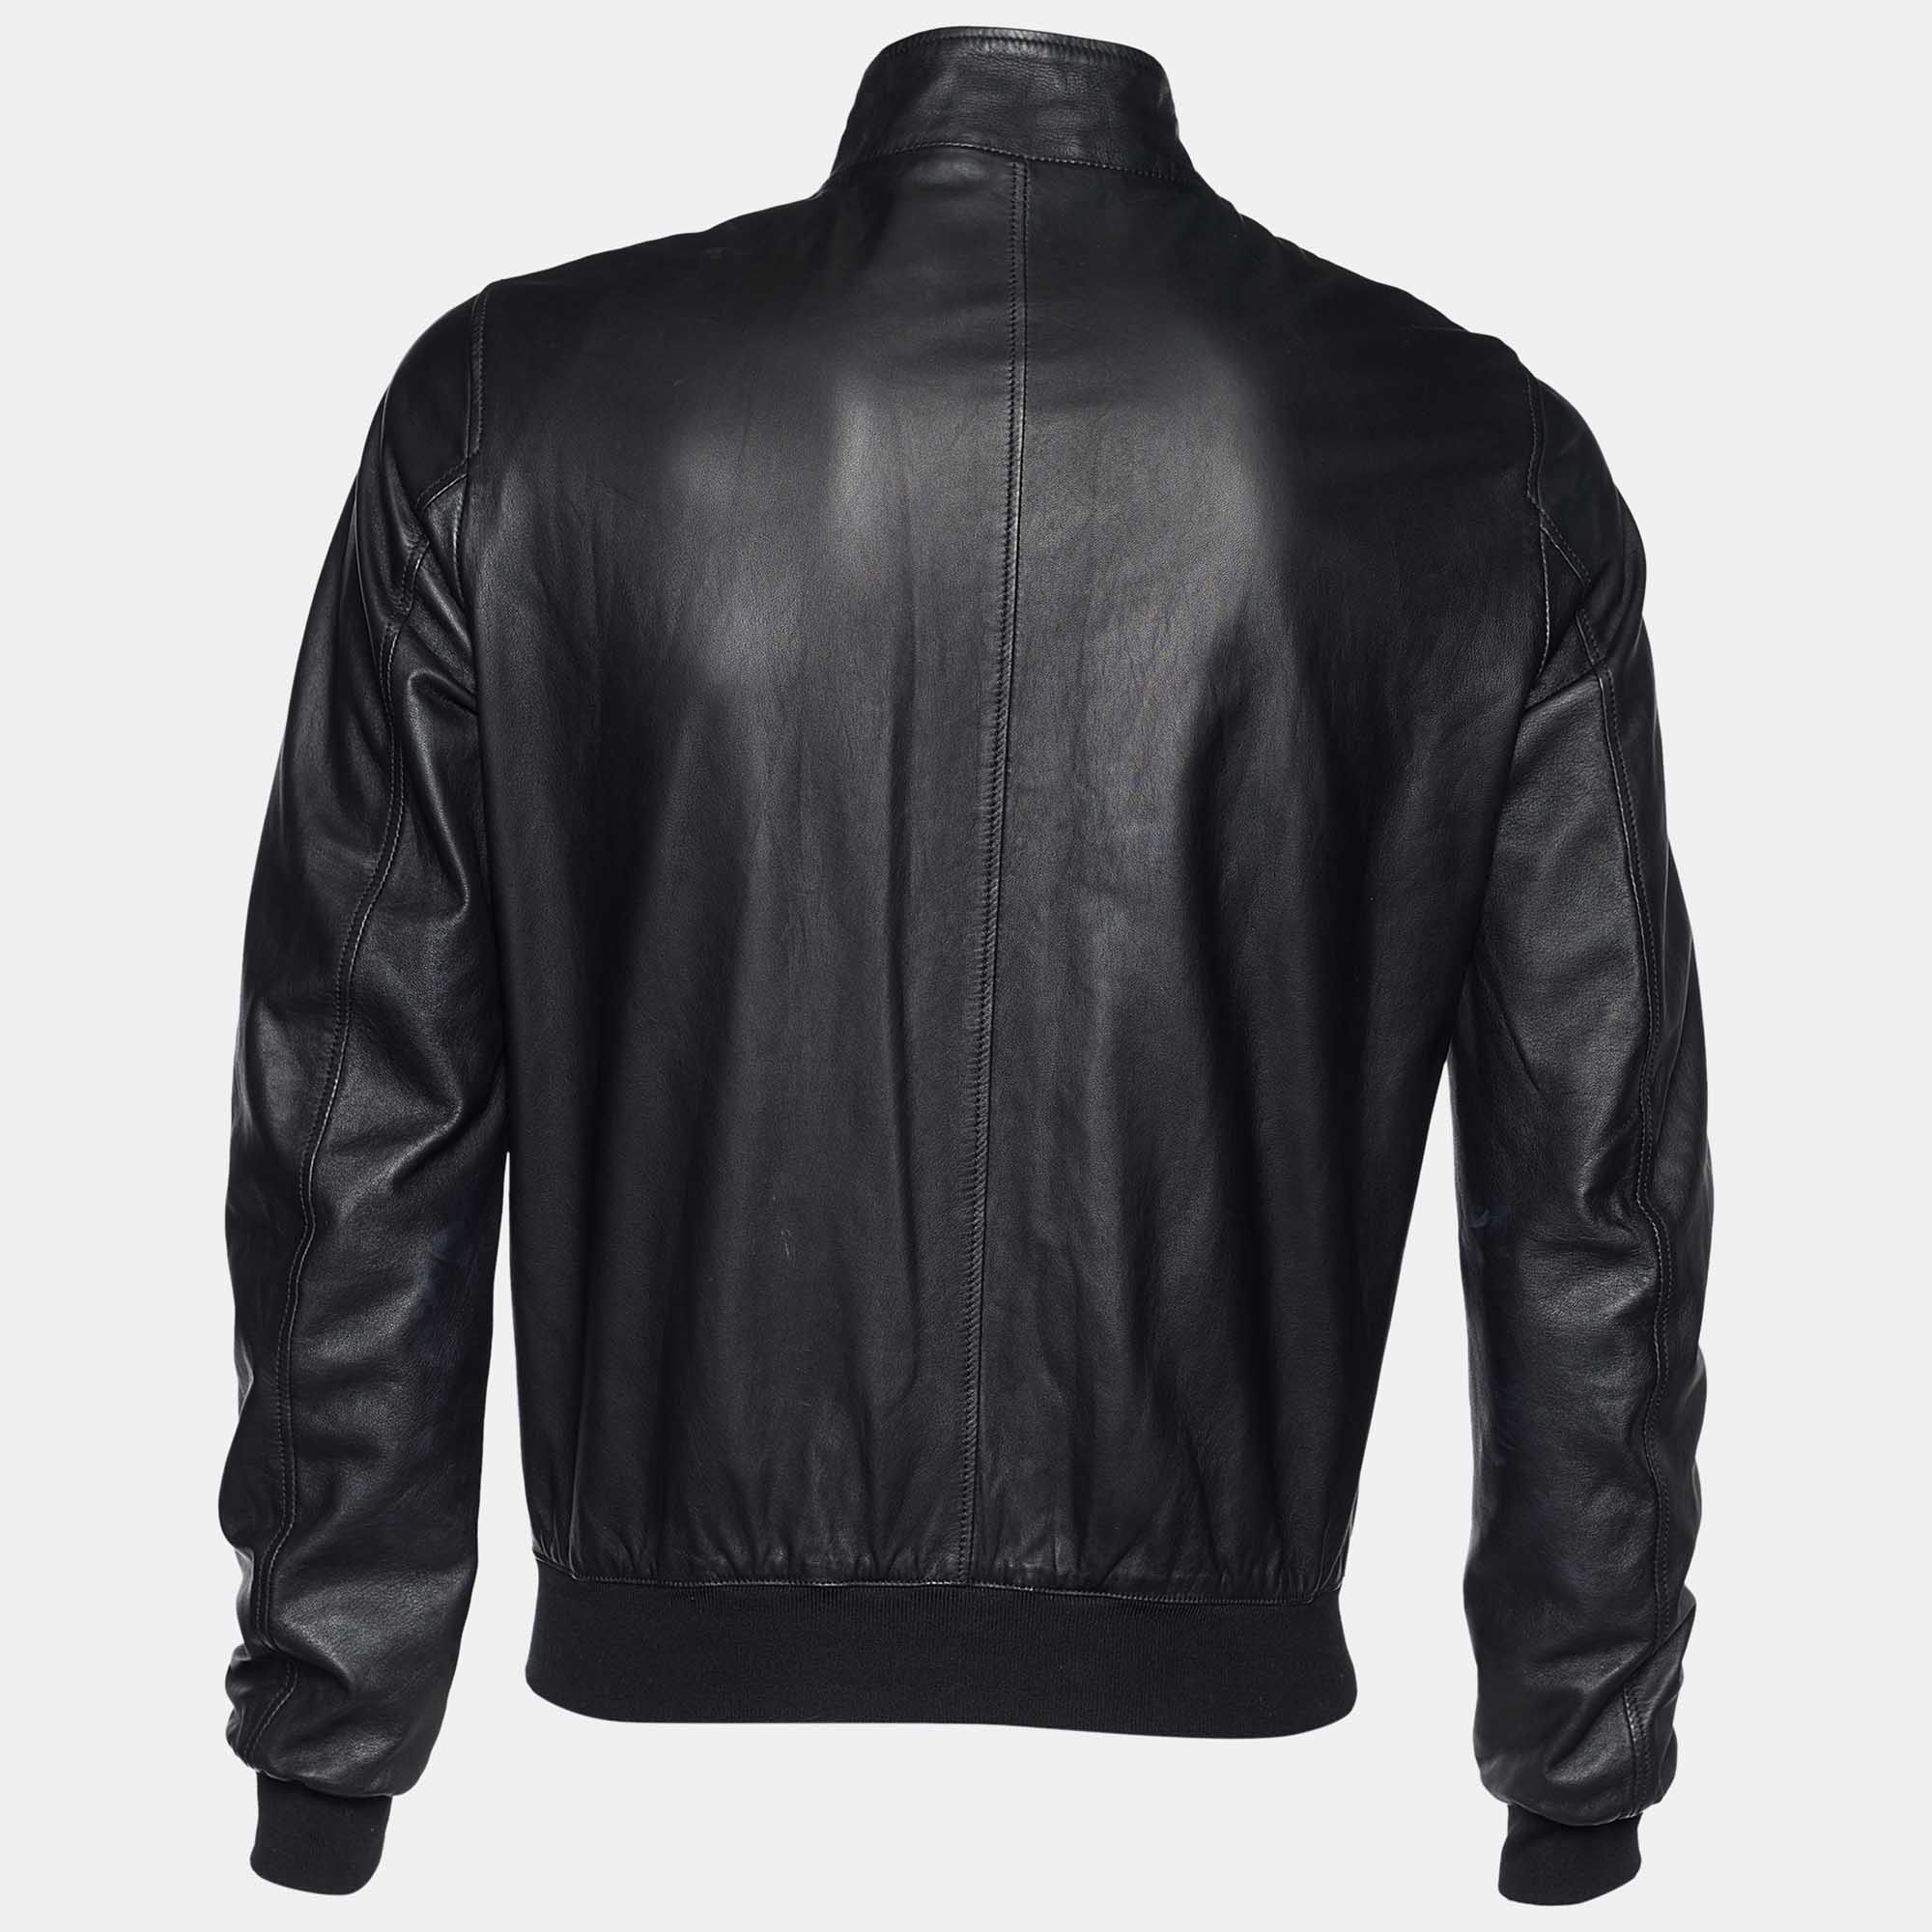 

Gucci Black Leather Rib Knit Trimmed Zip Front Jacket